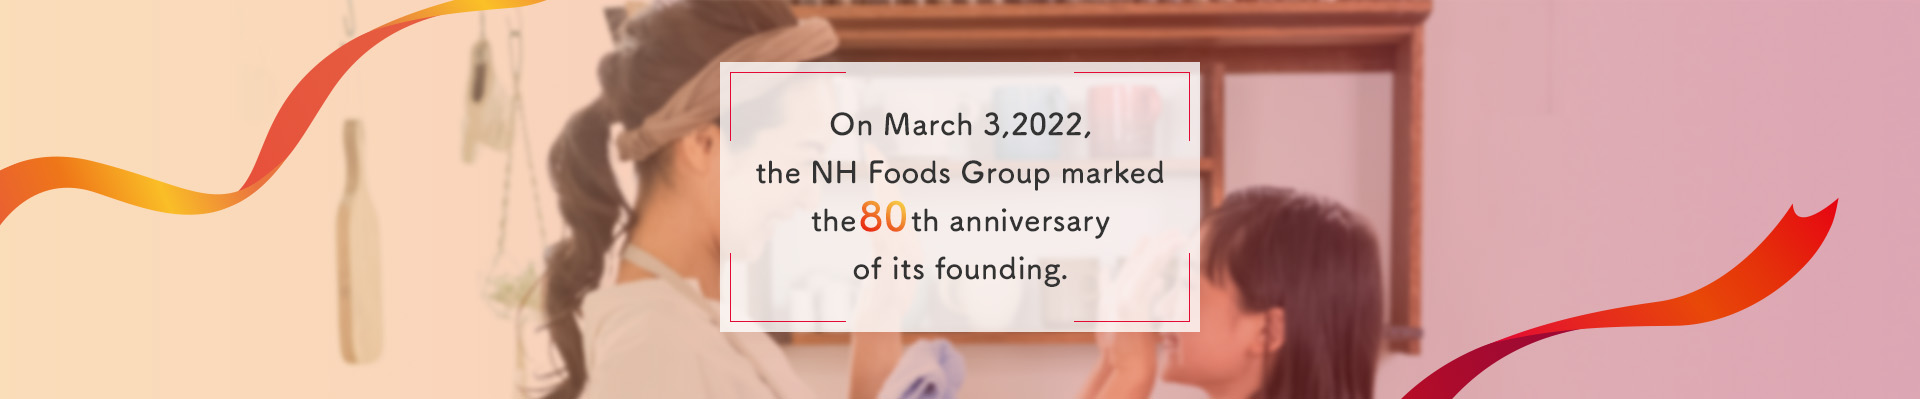 On March 3,2022,the NH Foods Group marked the 80th anniversary of its founding.